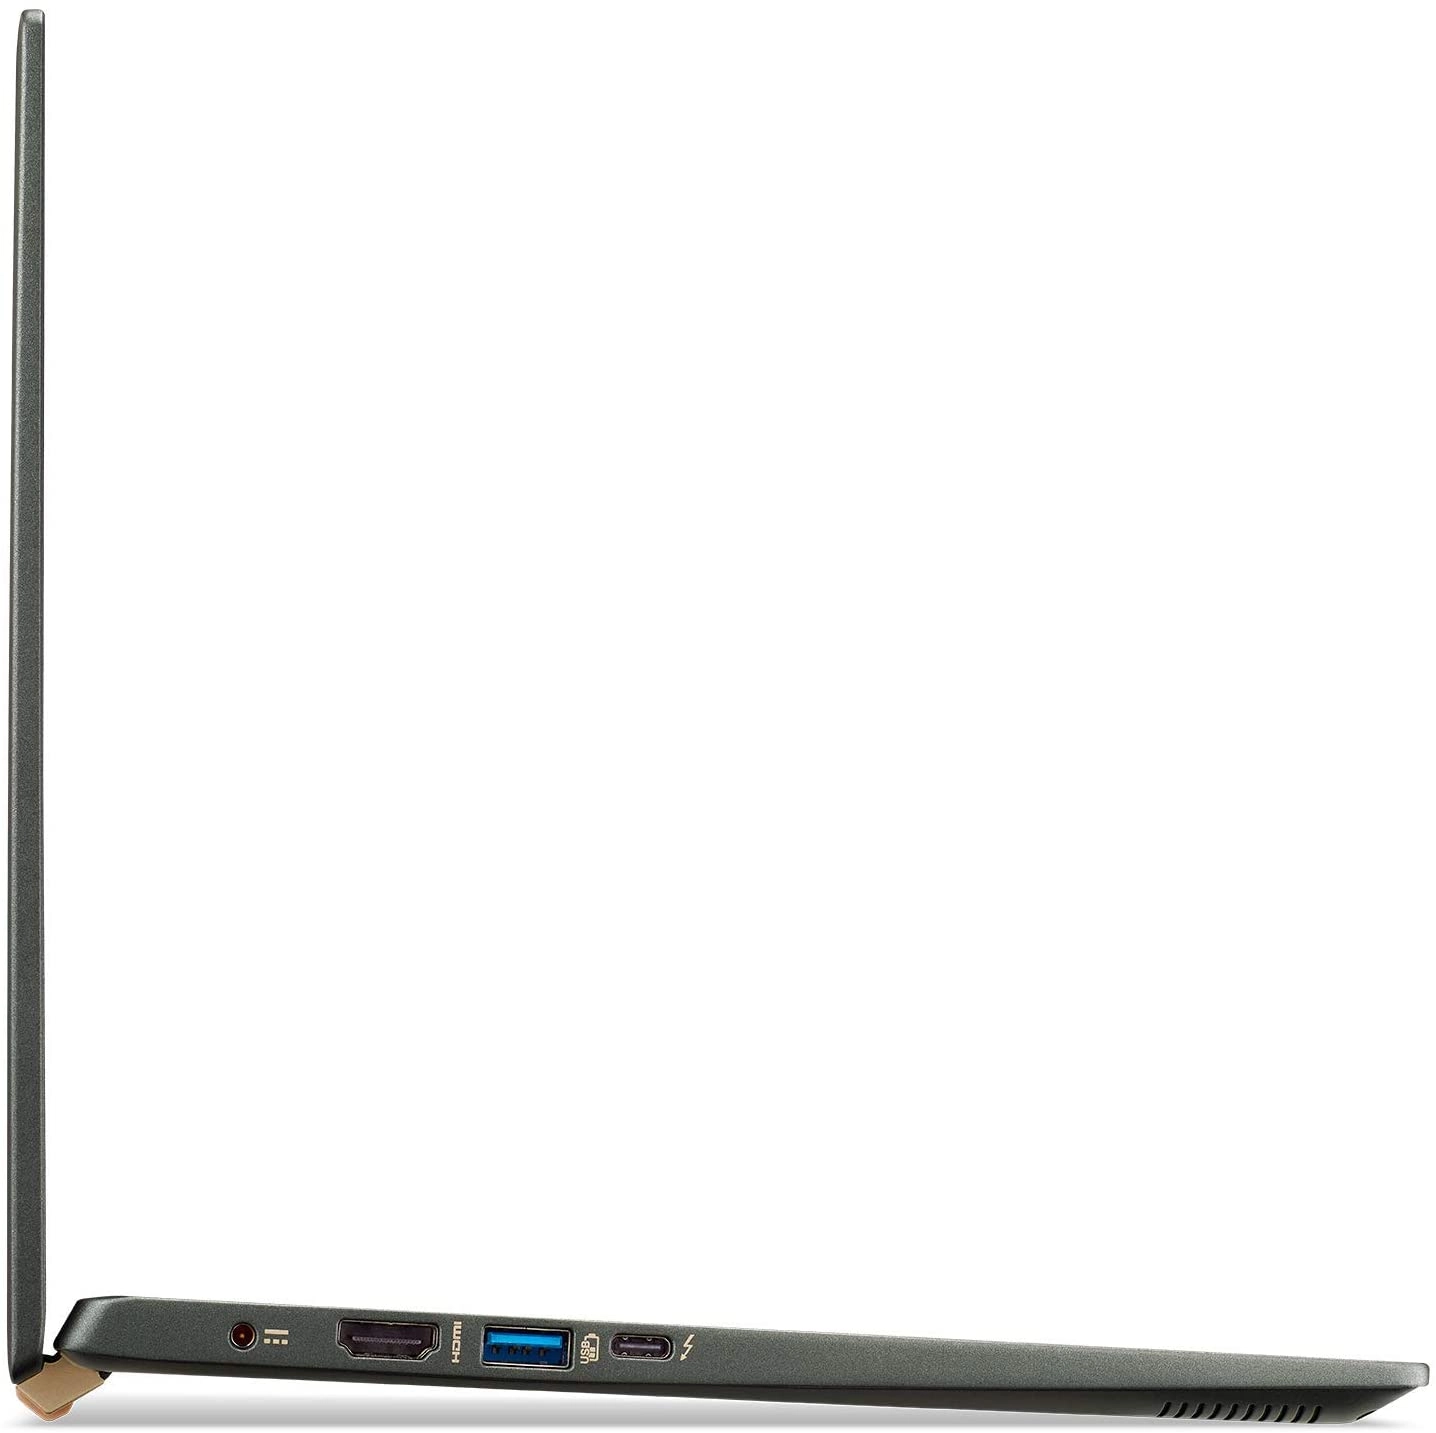 Acer SF514-55T laptop image